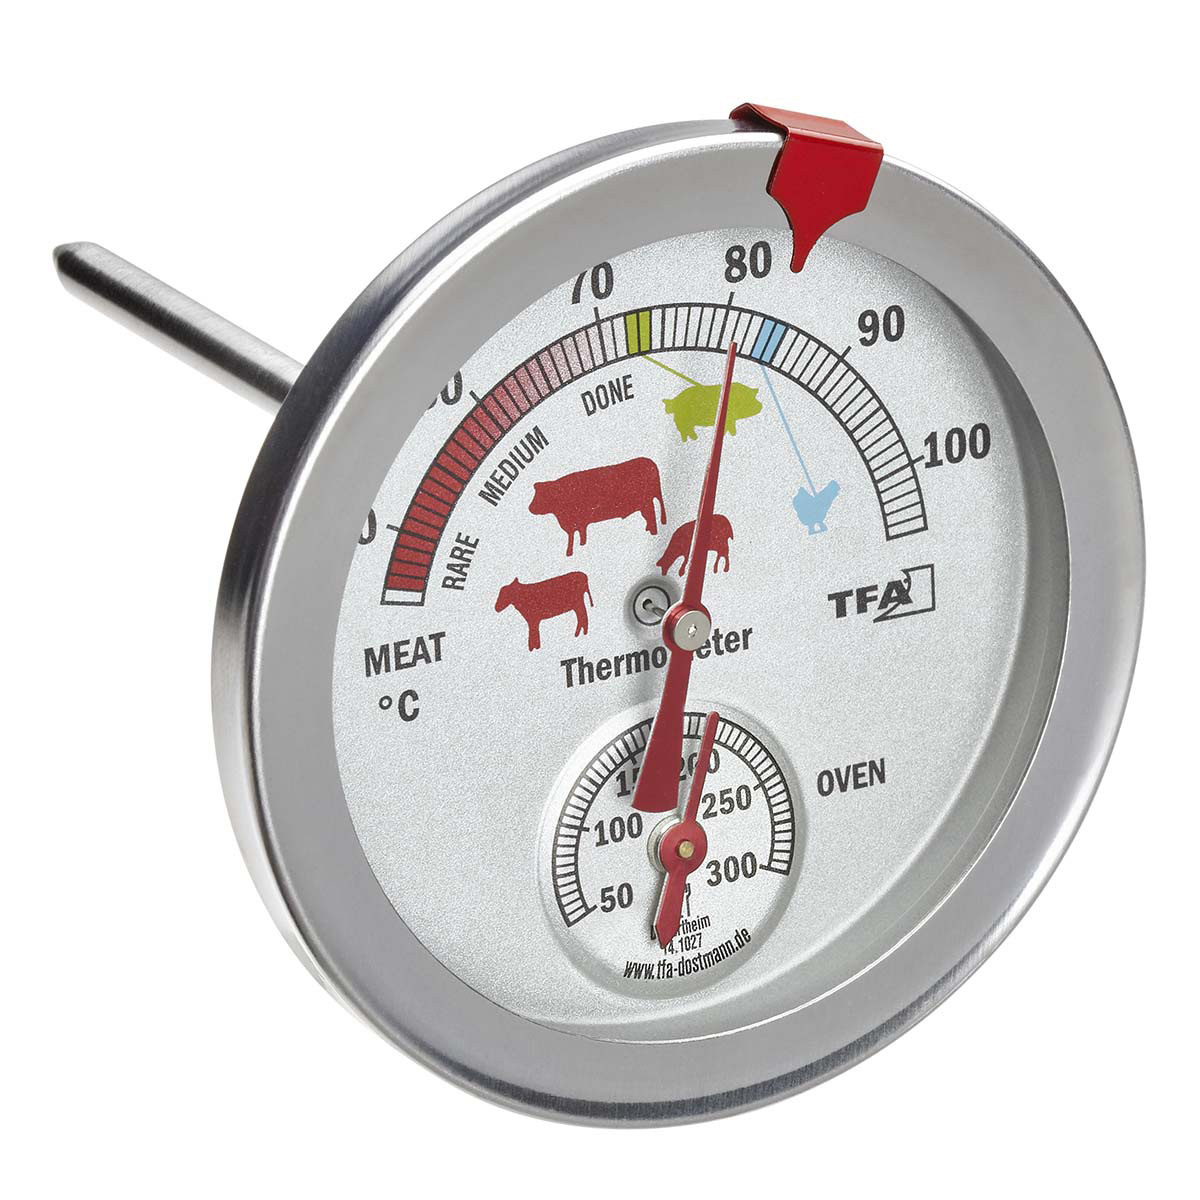 14-1027-analoges-braten-ofenthermometer-1200x1200px.jpg